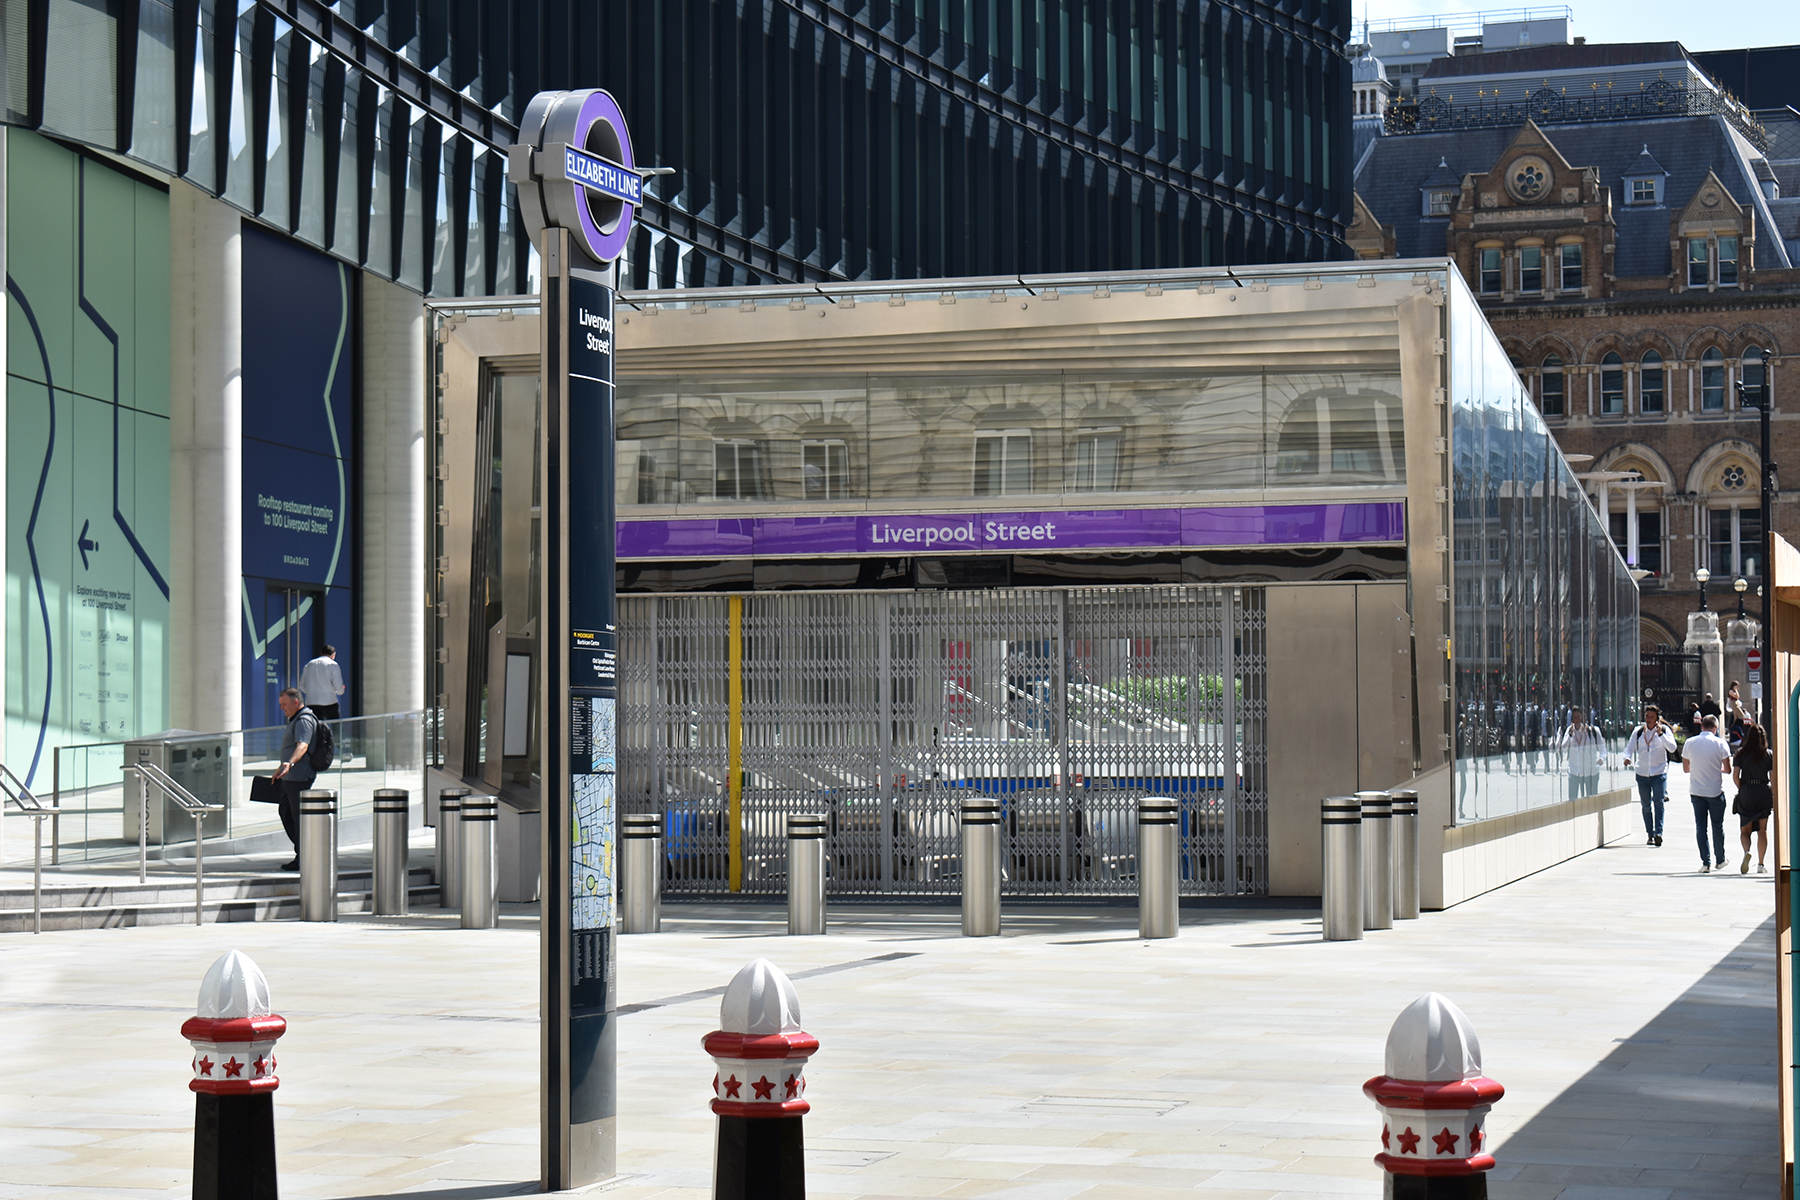 The Liverpool Street station on the newly opened Elizabeth line, also known as Crossrail, sits above the Bedlam burial ground and an ancient Roman suburb. (Image courtesy of Transport for London)